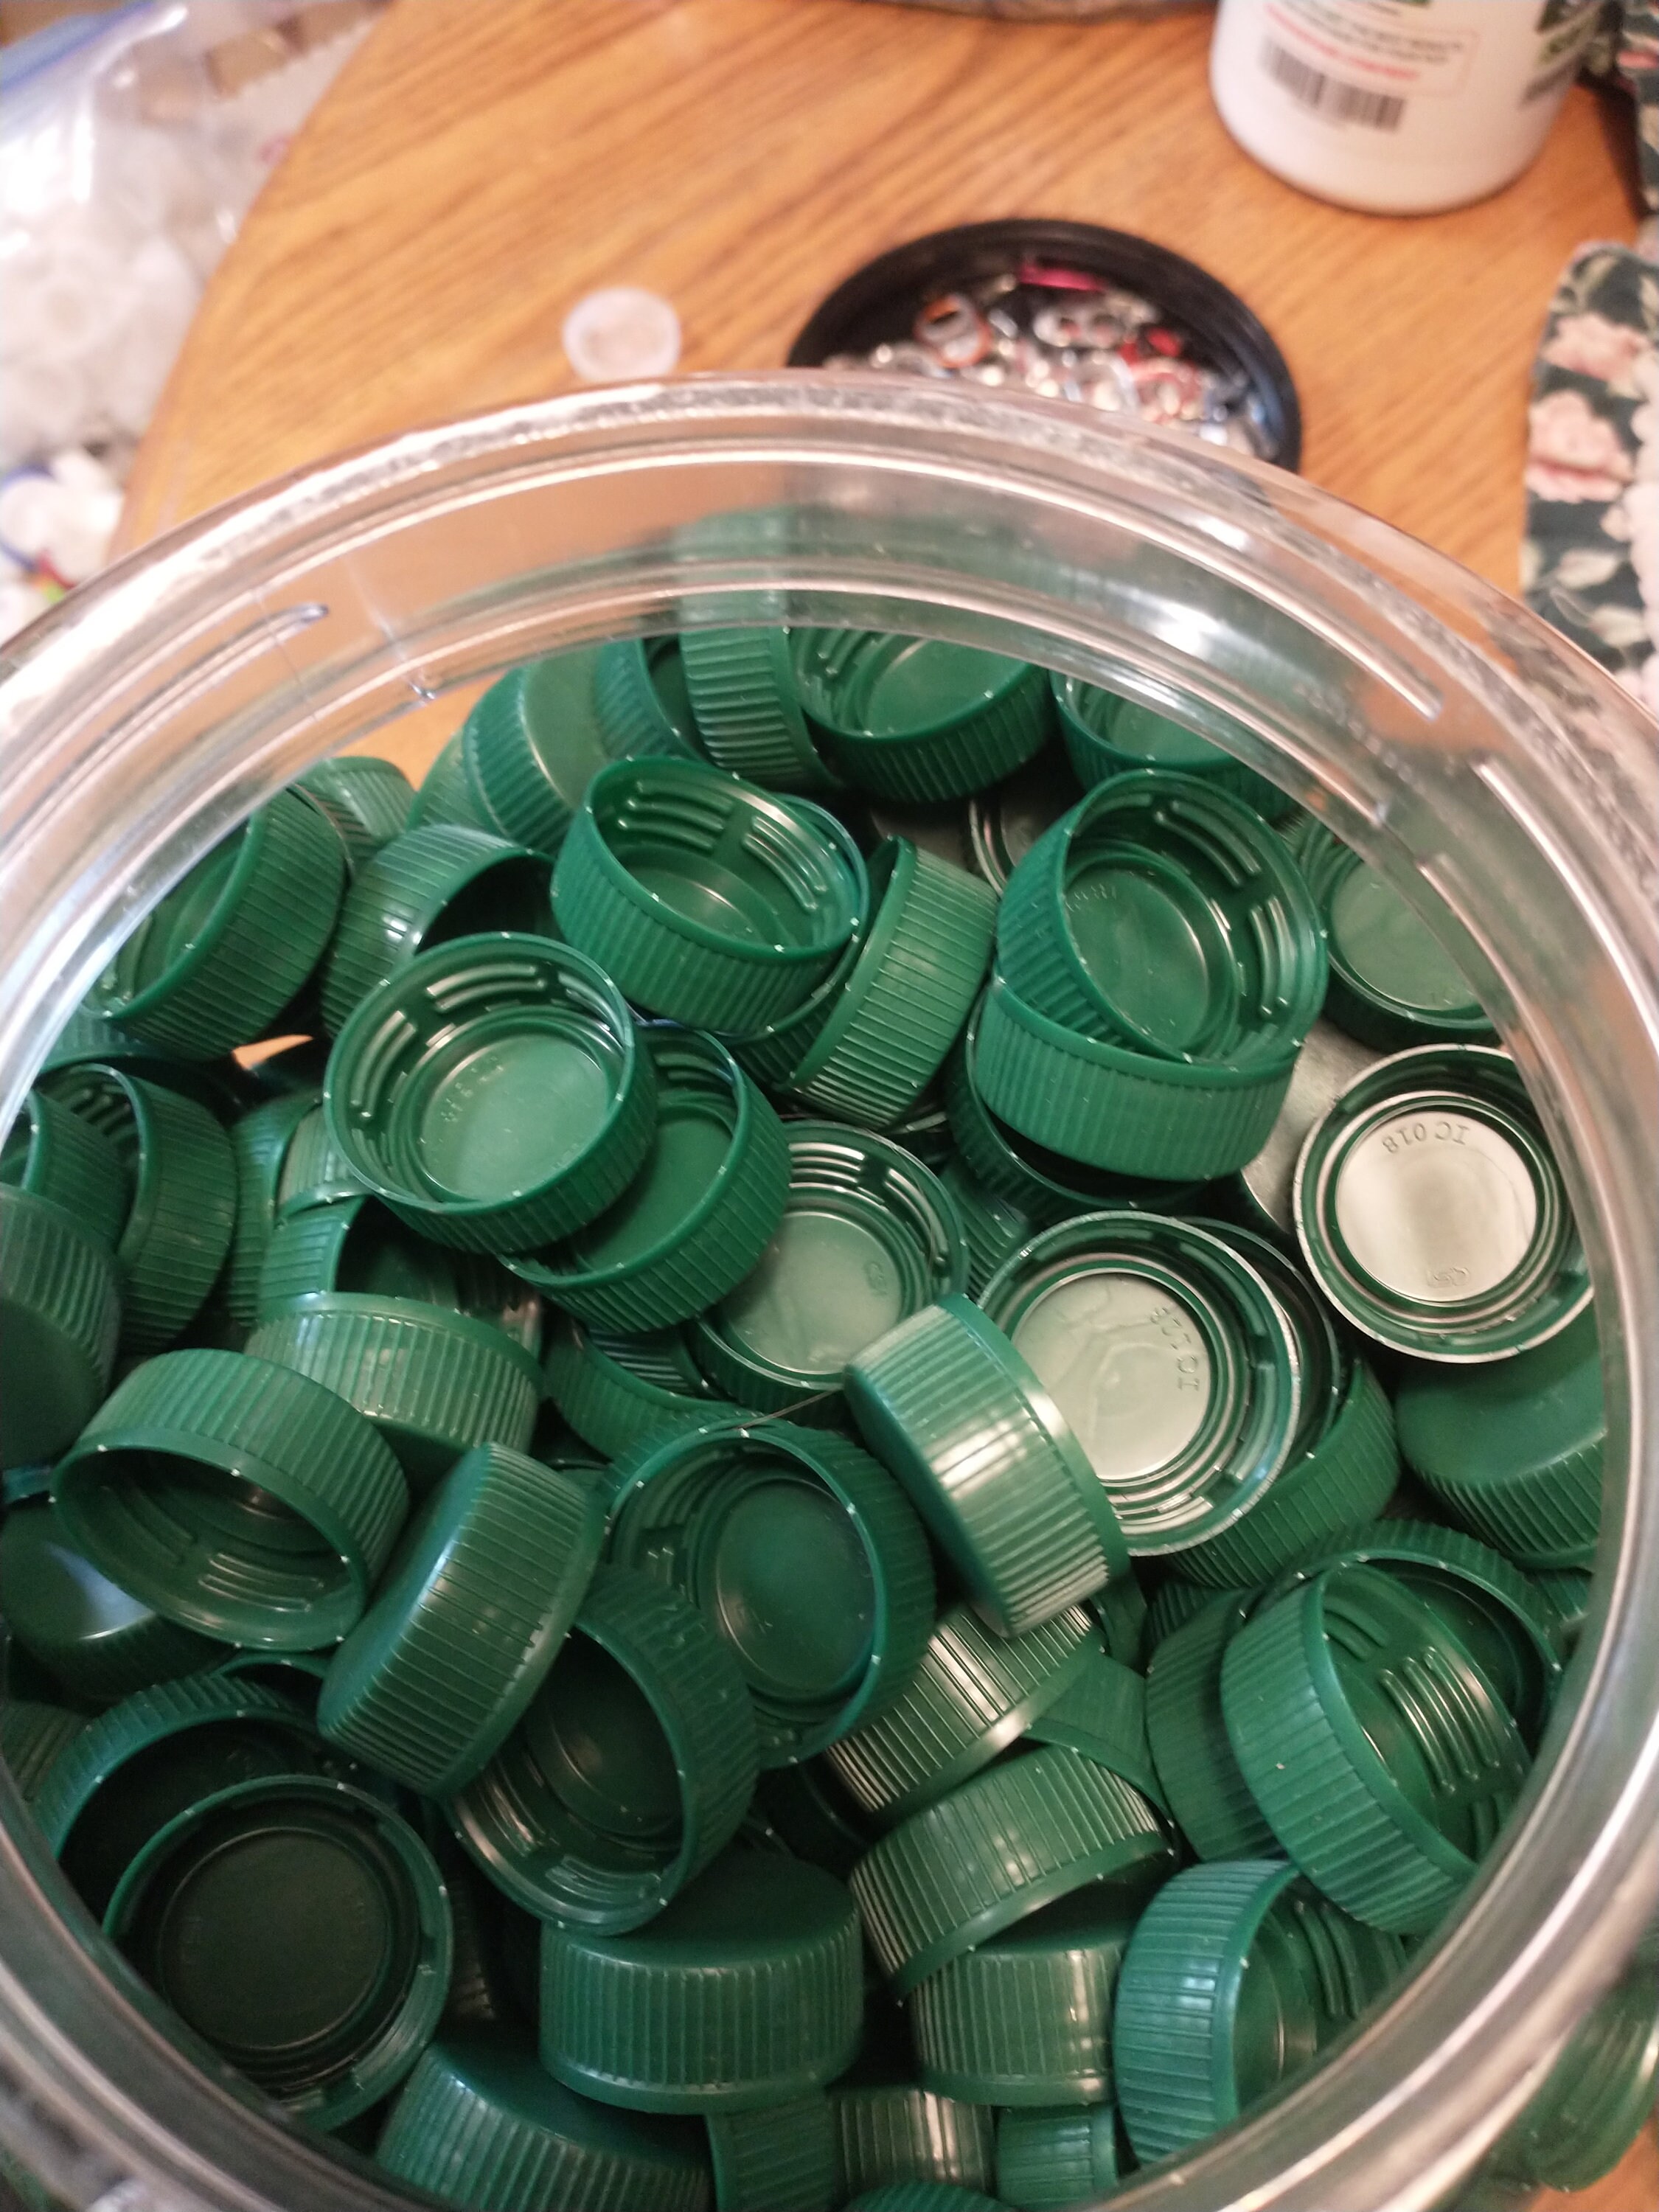 Colored Bottle Caps Set On White Background. Green, Red, White